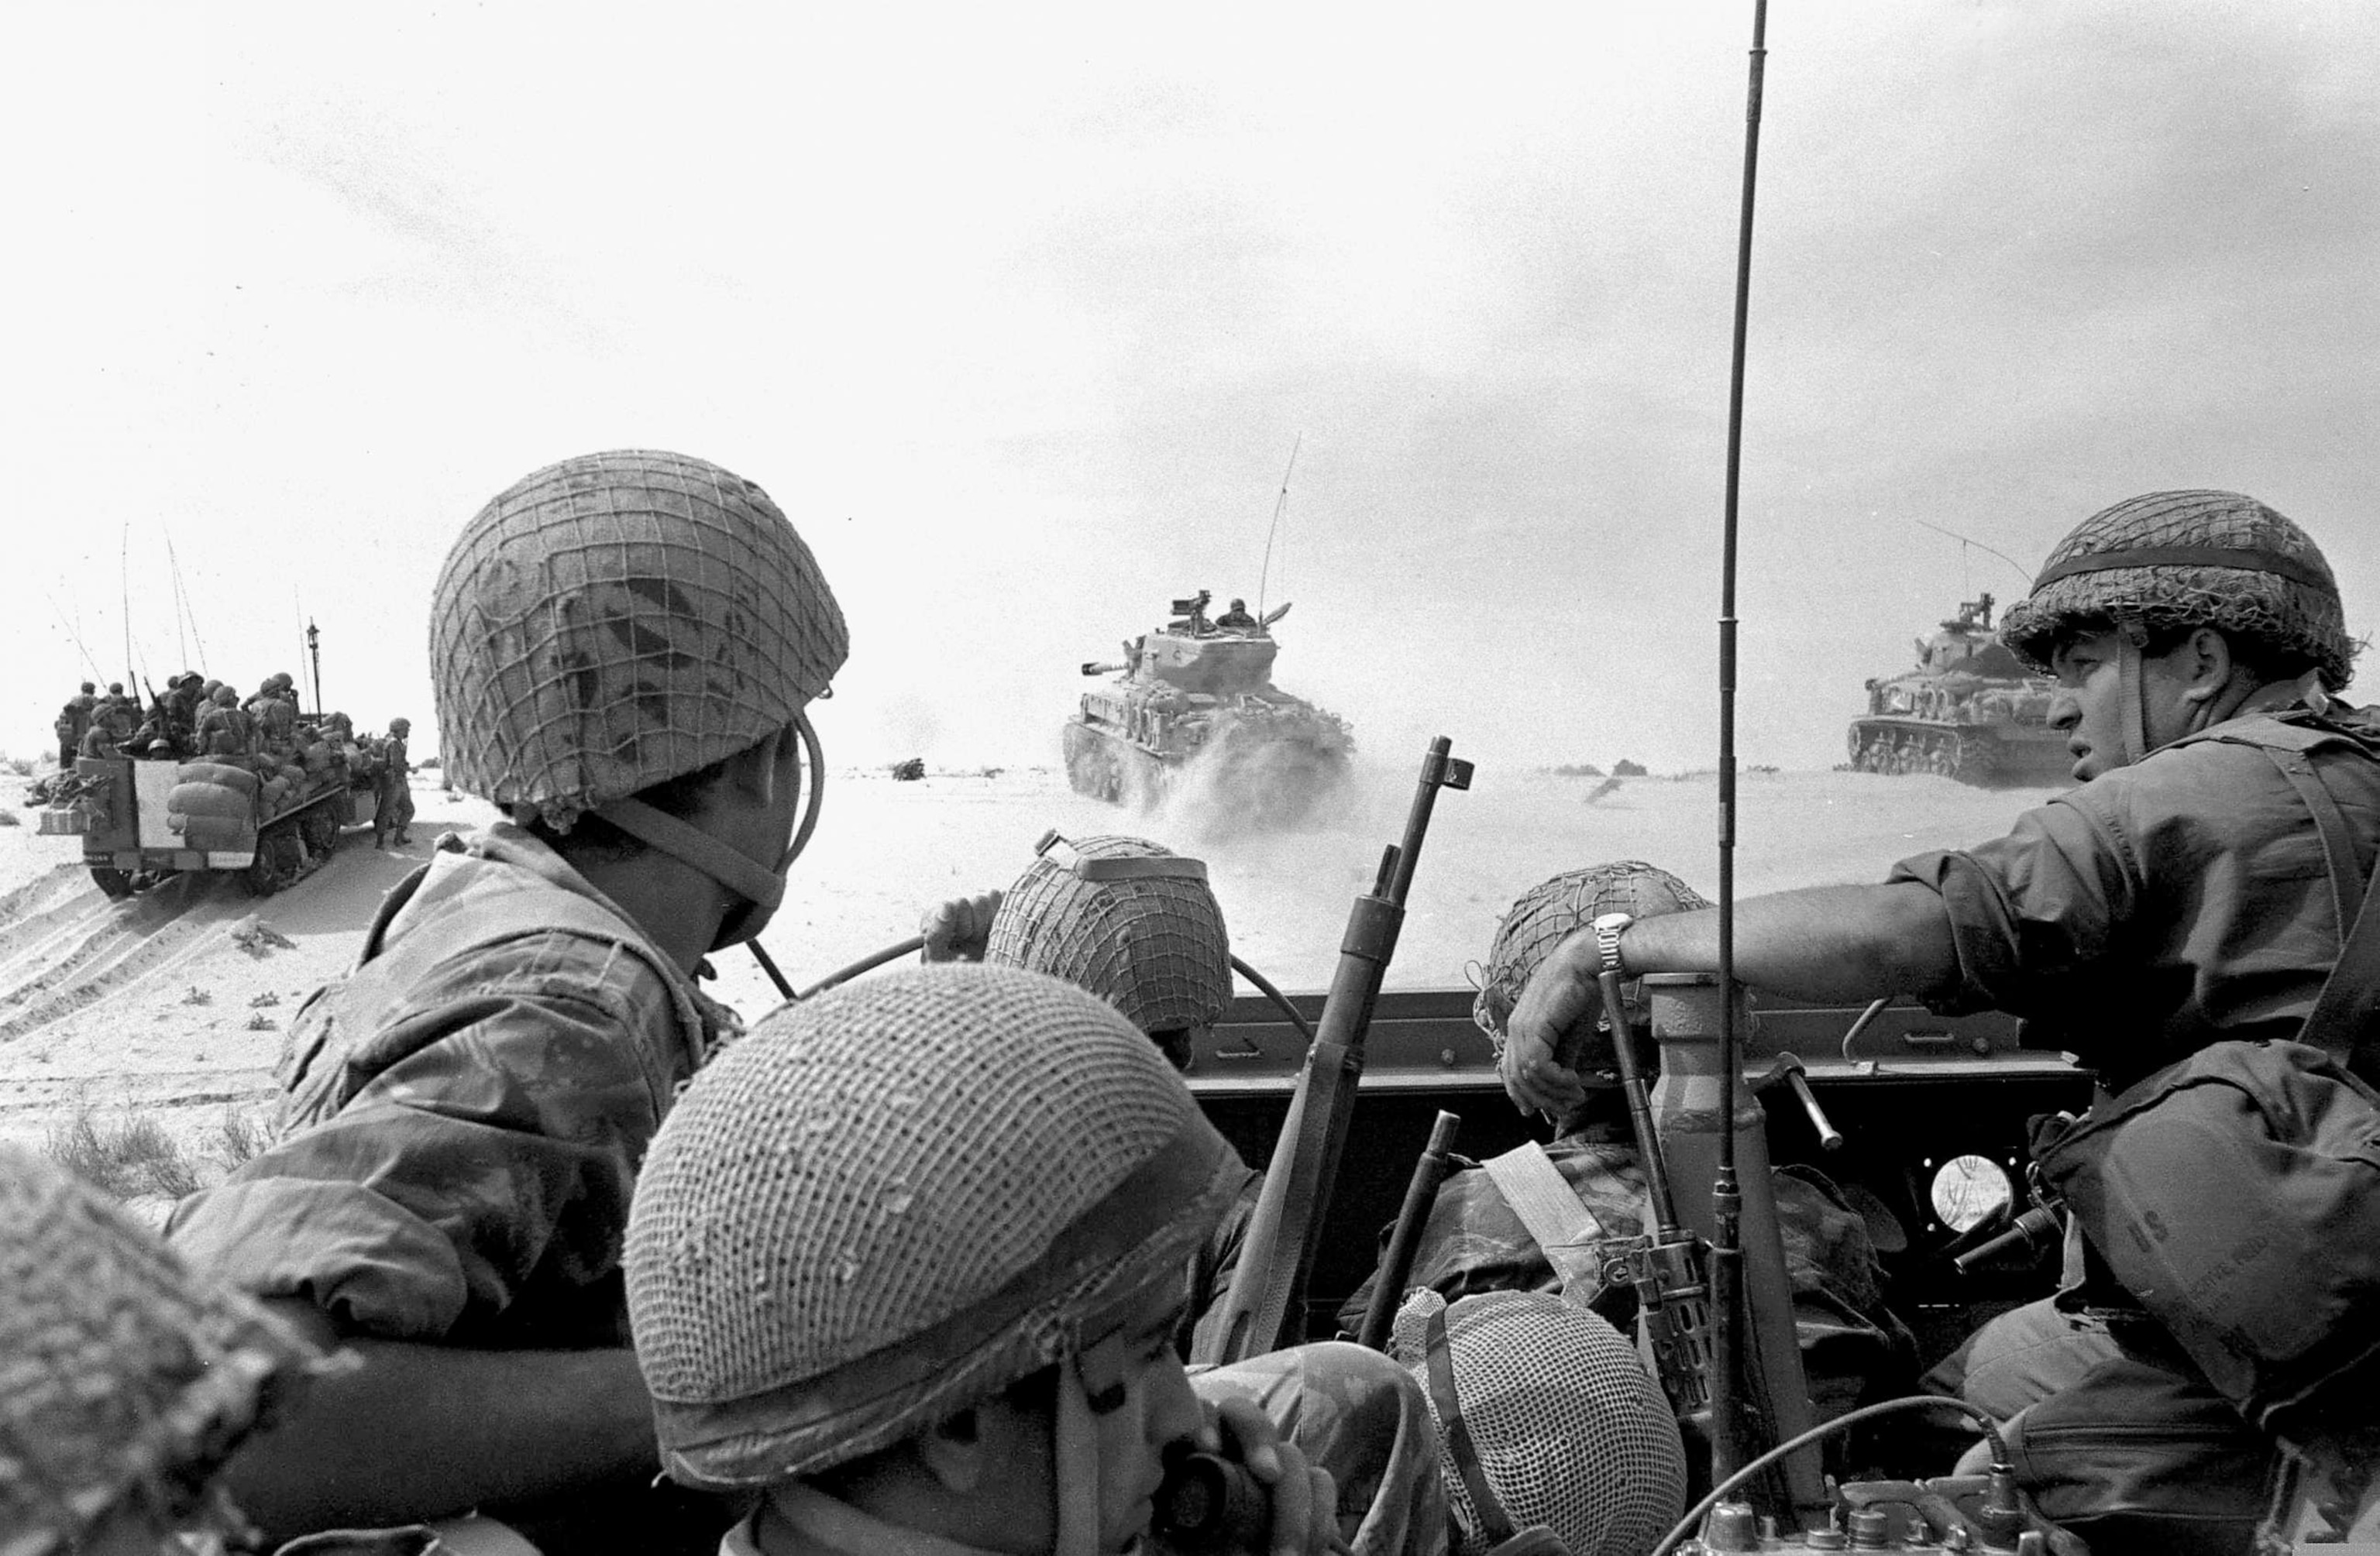 PHOTO: Israeli troops advance against Egyptian troops at the start of the Six-Day War, June 5, 1967, near Rafah, Gaza Strip.